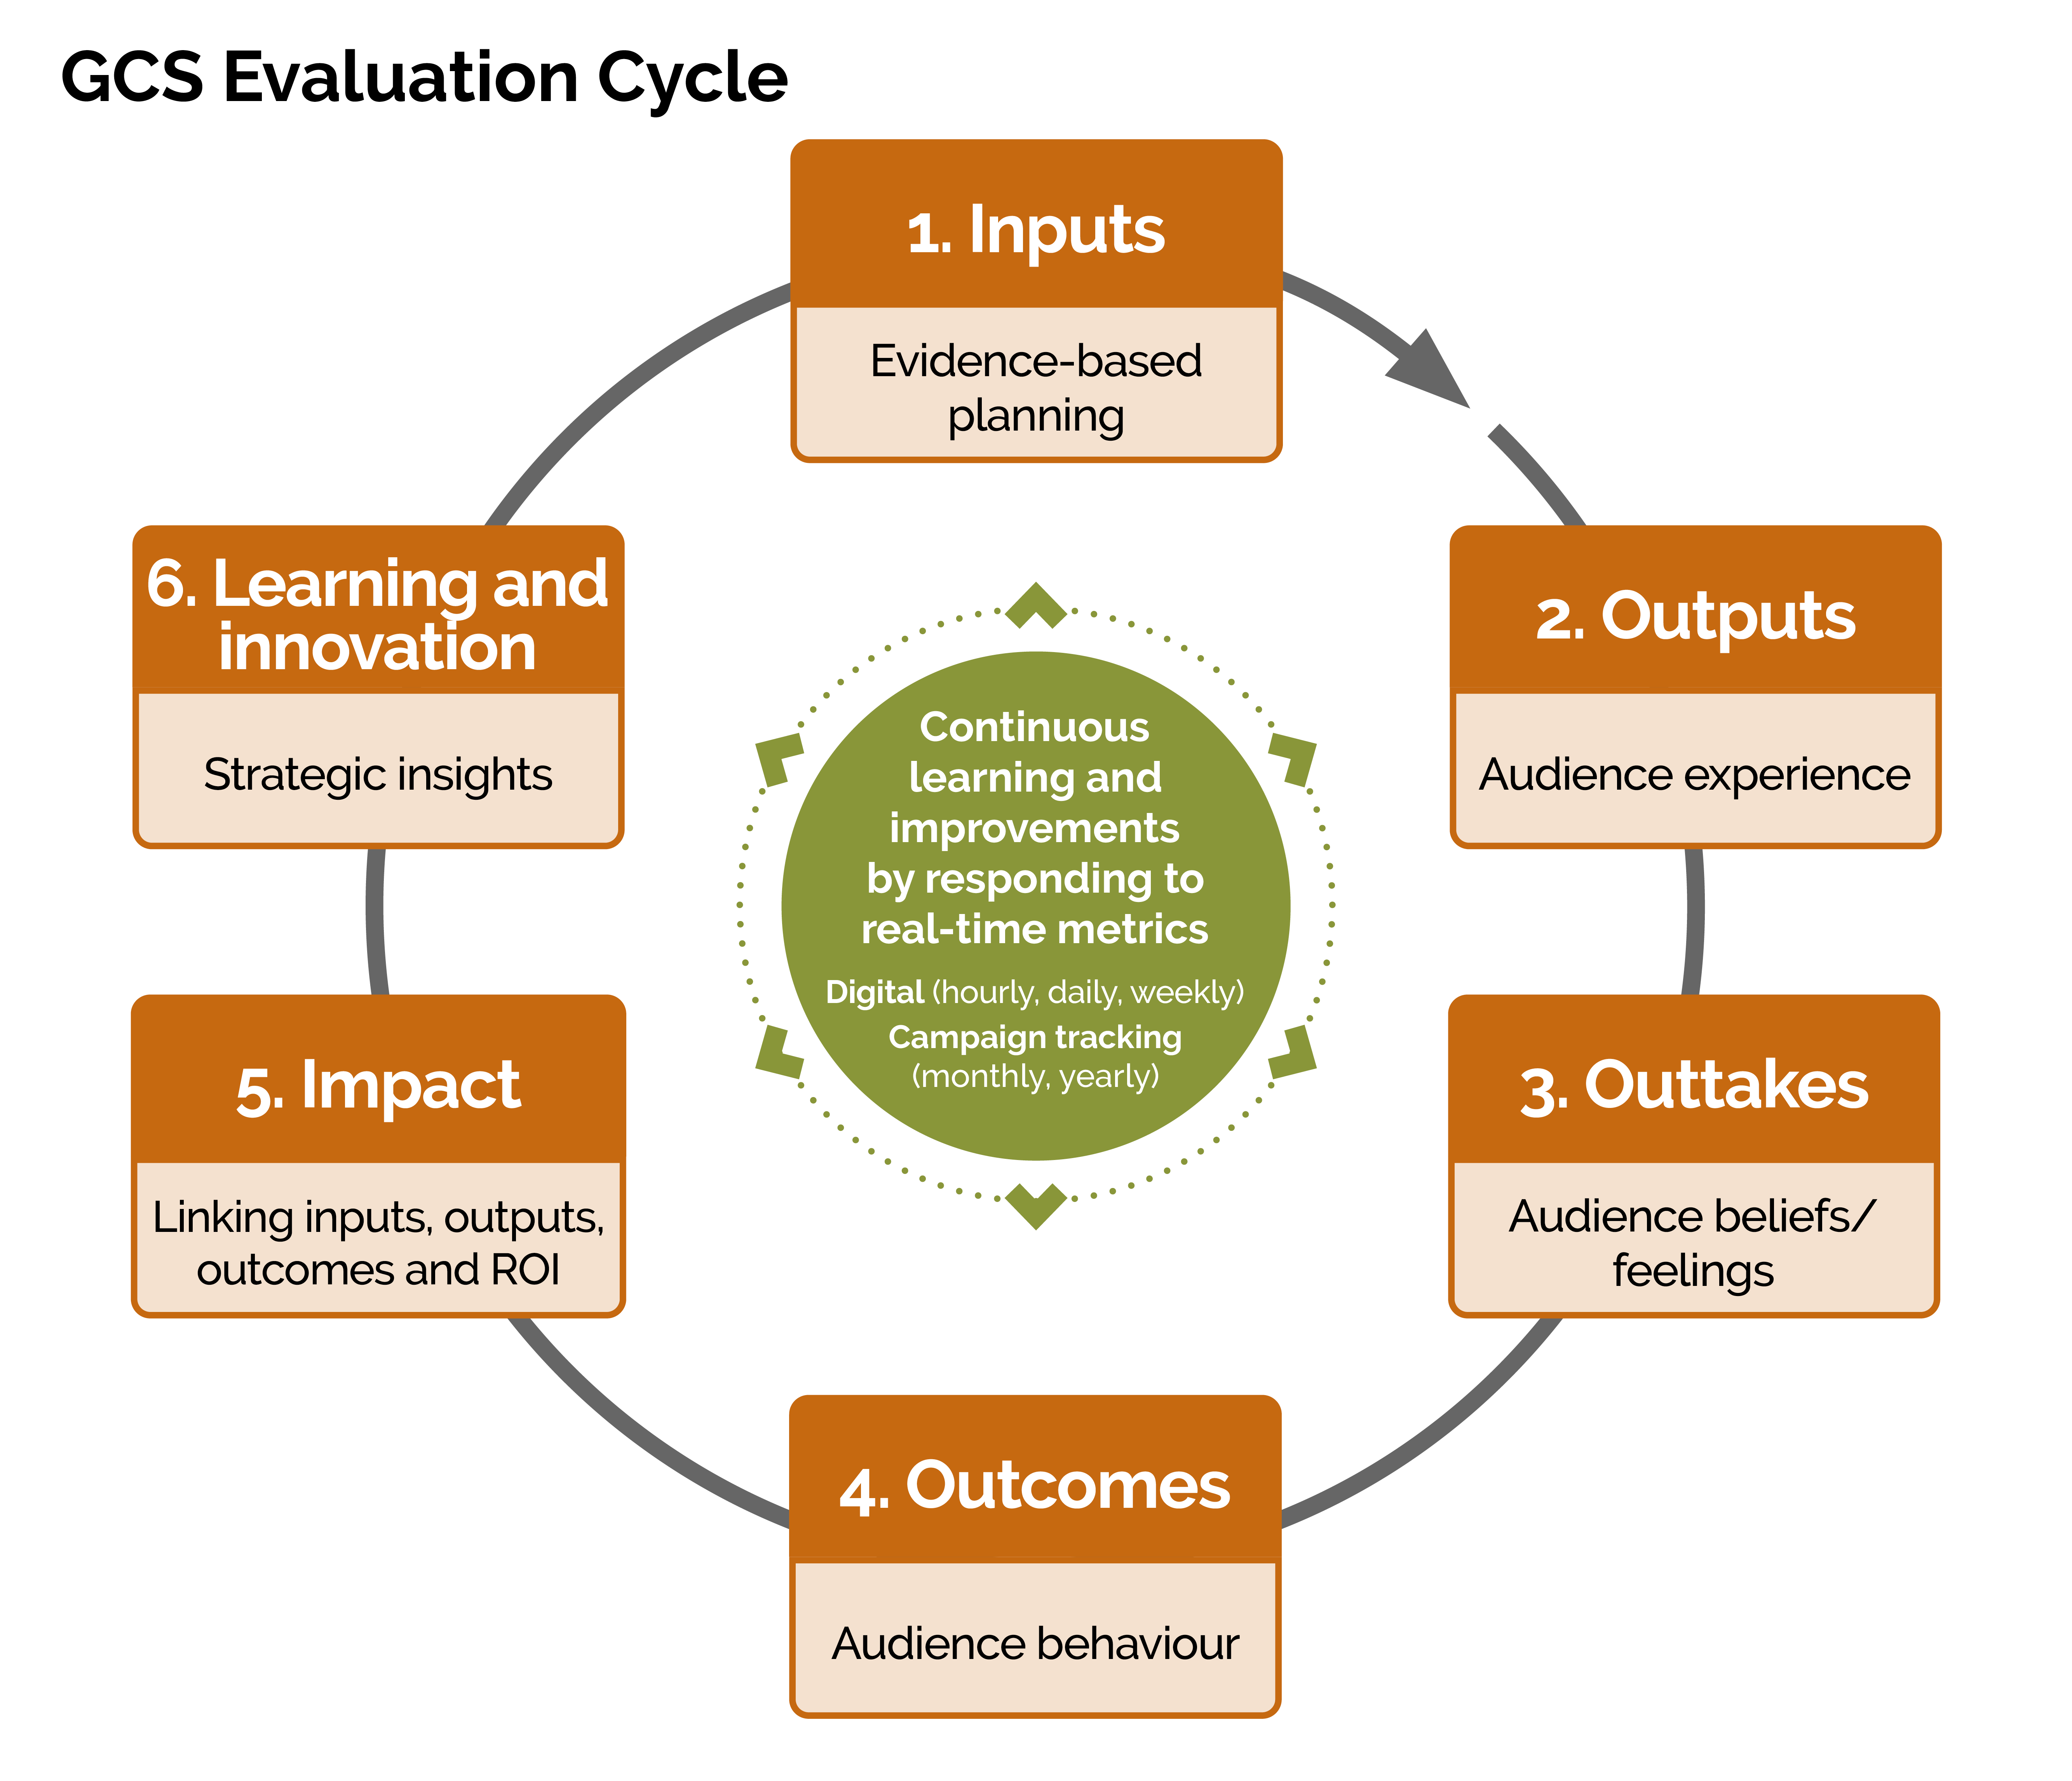 A diagram of the Evaluation Cycle, which shows a cyclical process with 6 steps (Inputs, Outputs, Outtakes, Outcomes, Impact, and Learning and Innovation) and the core of Continuous Learning and Improvements in the middle. 